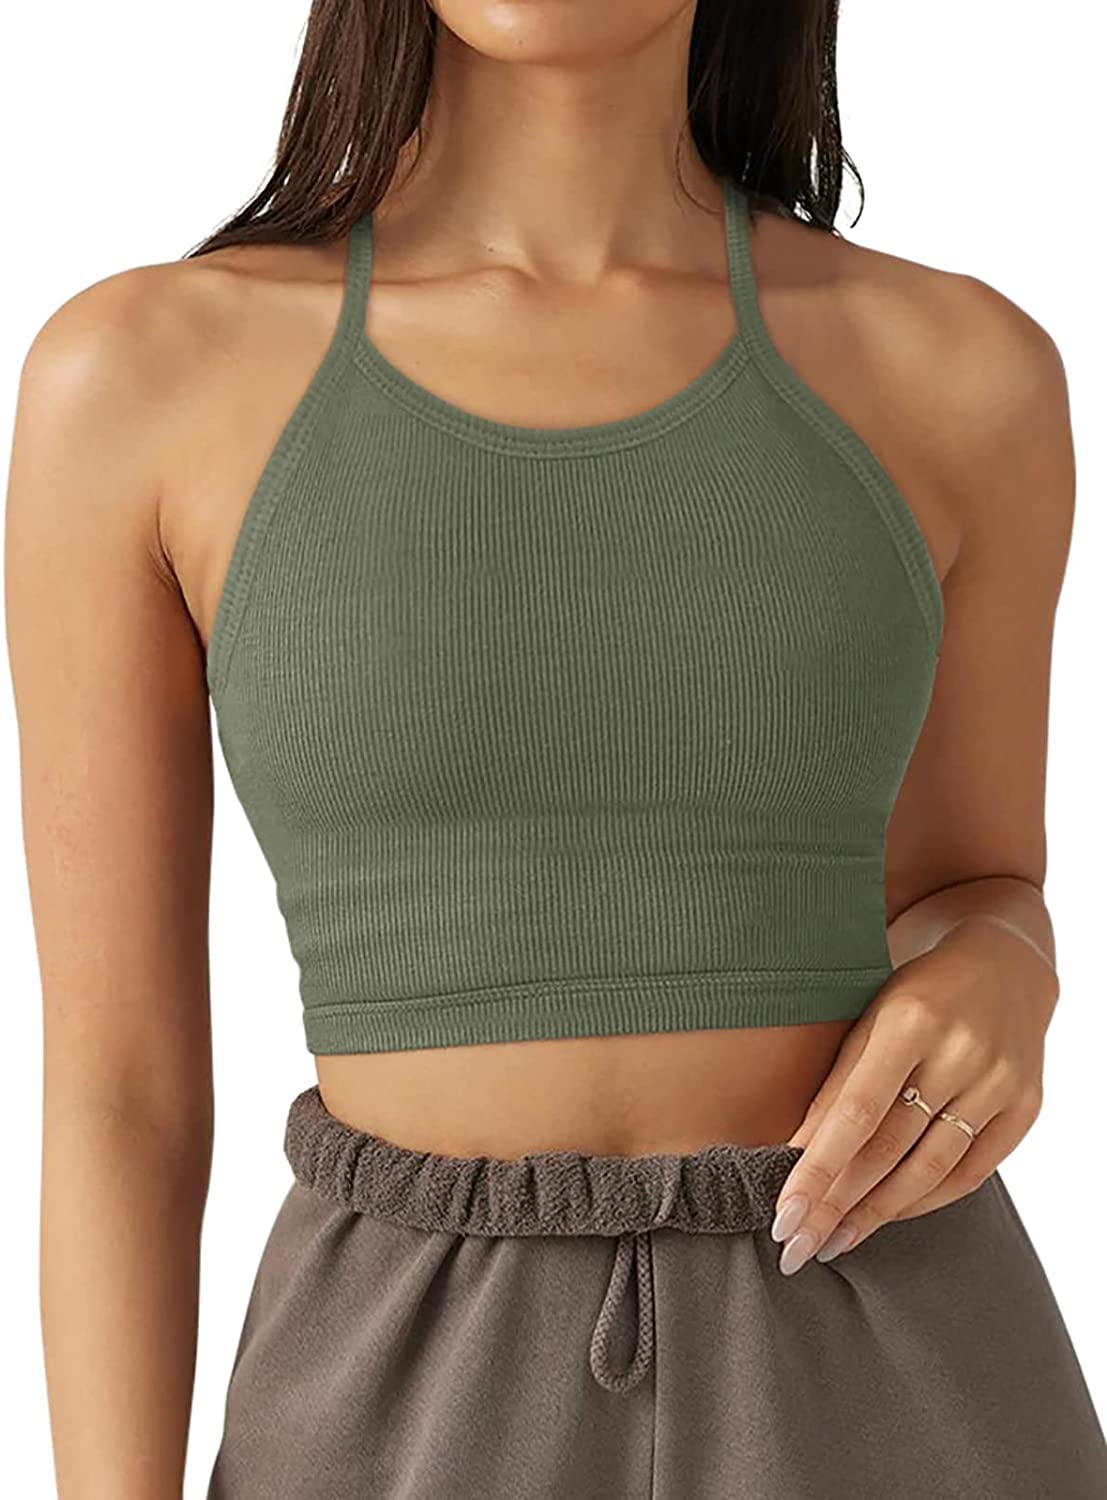 Buy THE GYM PEOPLE Women's Racerback Longline Sports Bra Removable Padded  High Neck Workout Yoga Crop Tops, White, S at